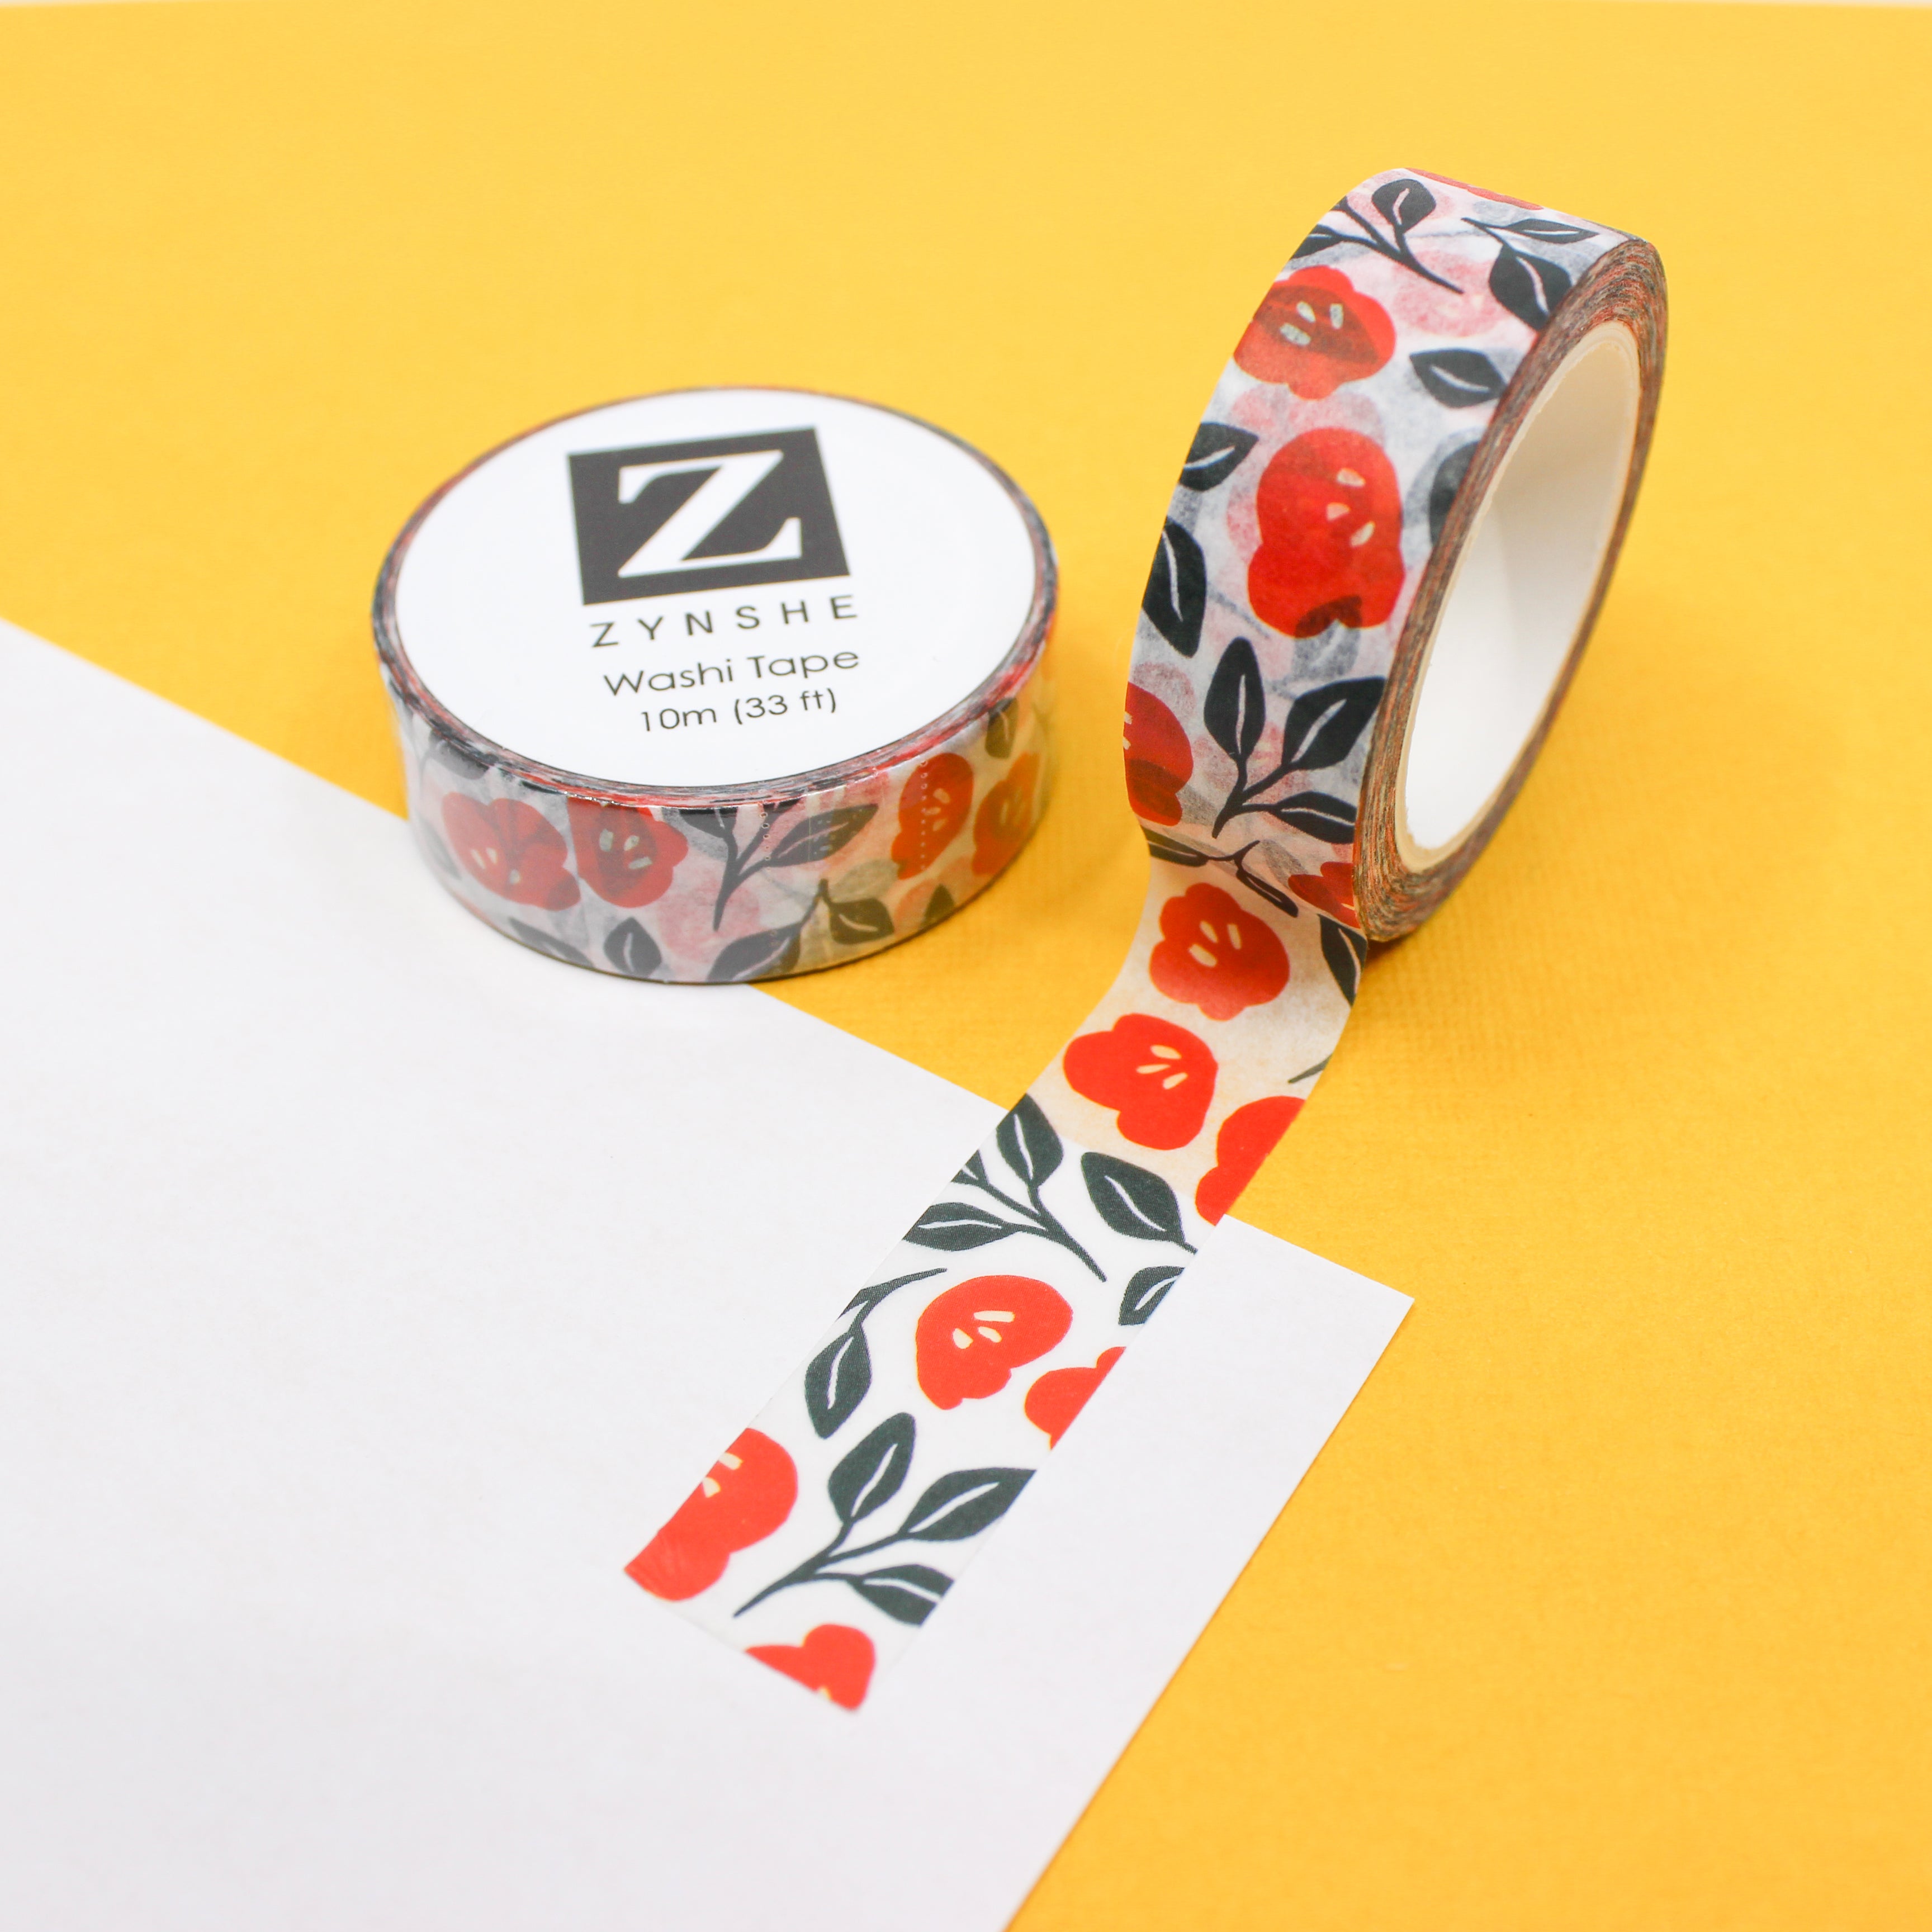 Elegant Red Floral tape from Zynshe that is perfect for gift wrap, craft projects or journaling sold at BBB Supplies Craft Shop.